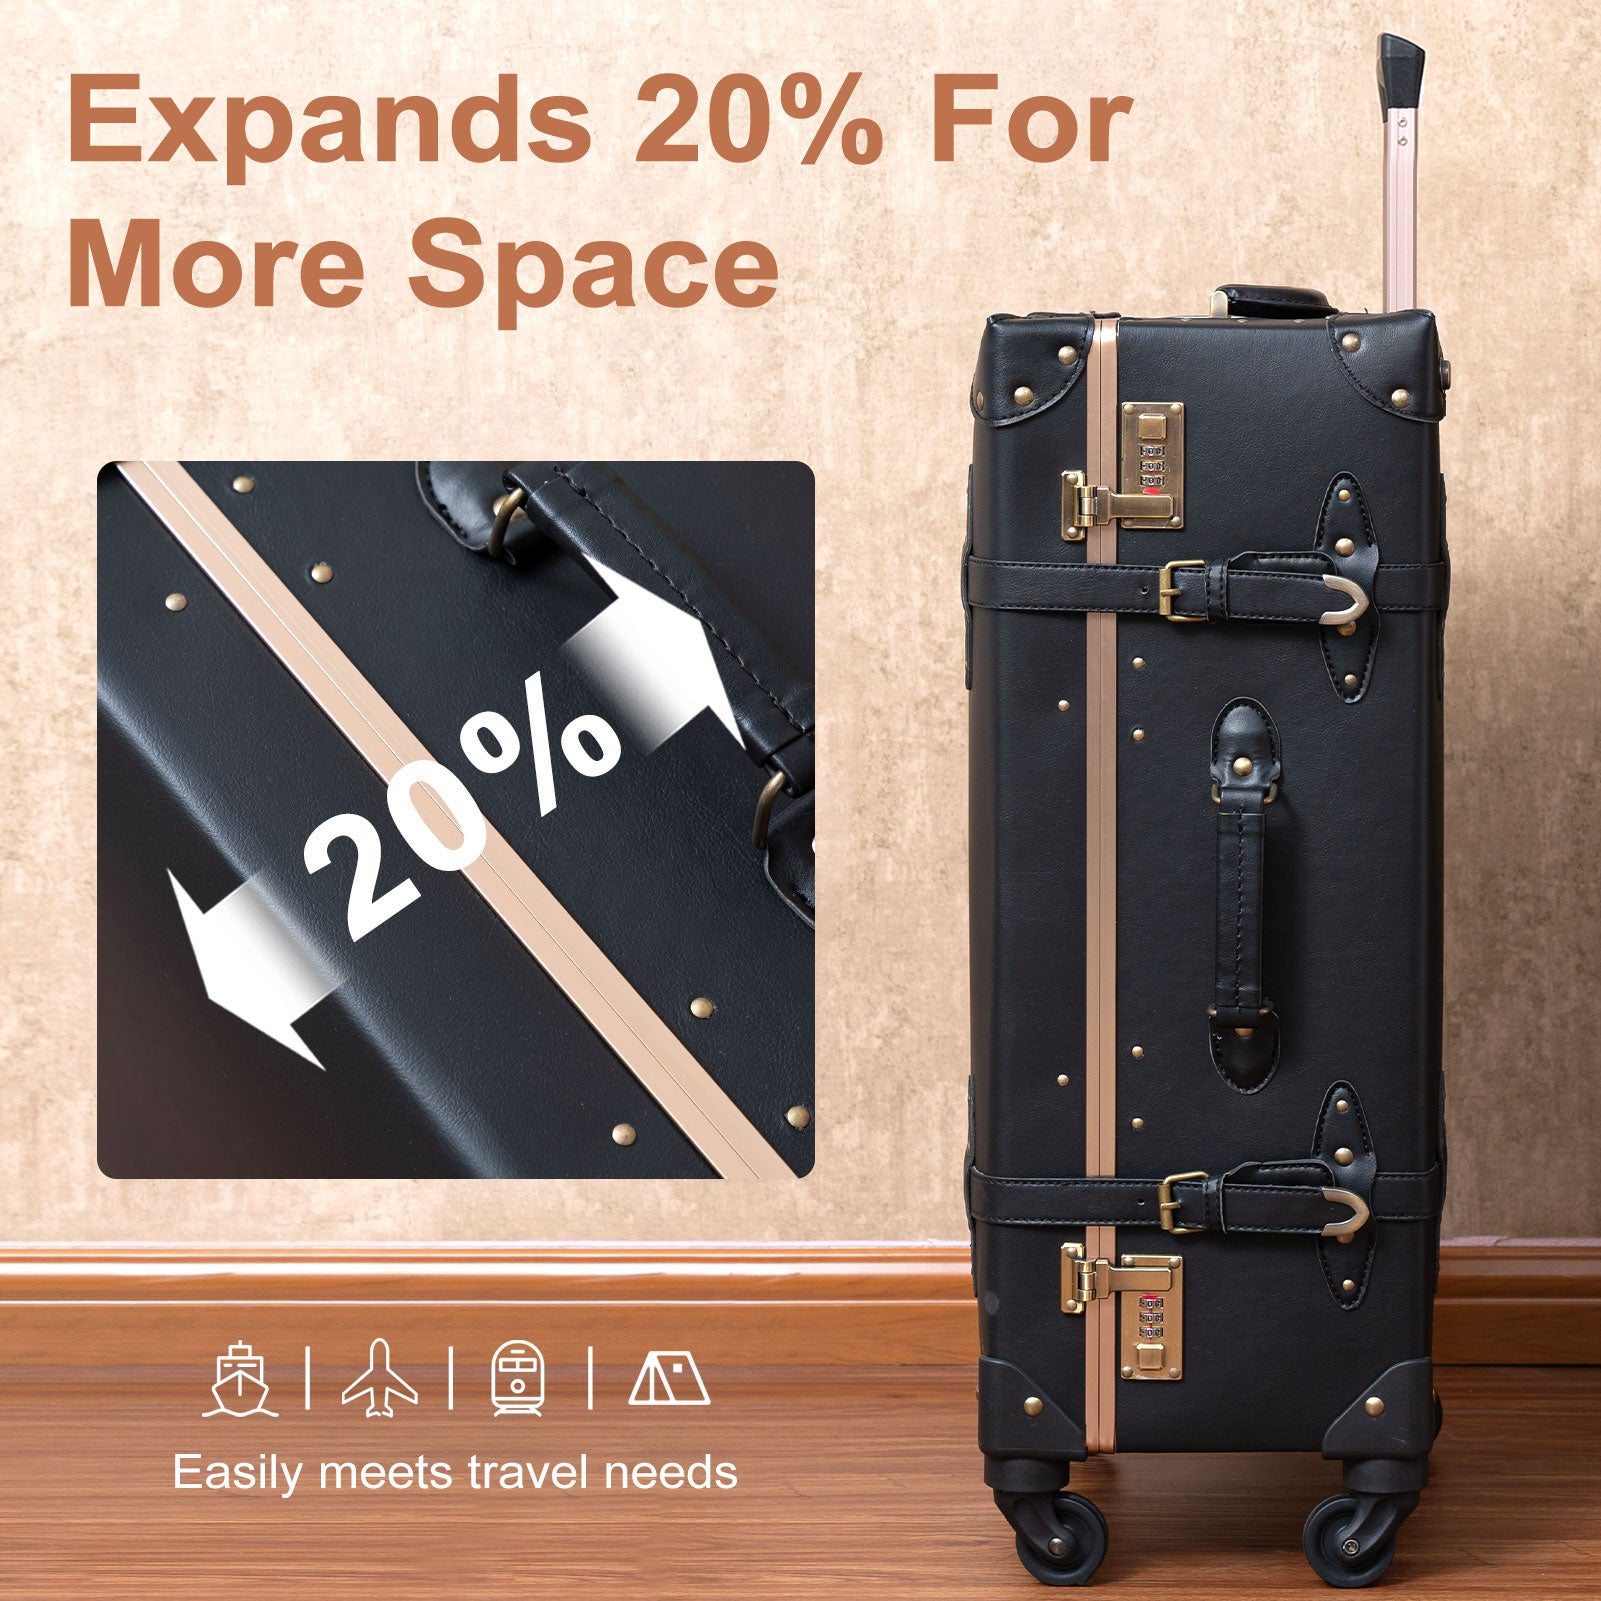 Urecity ​Handmade Vintage Luggage Set with Swivel Caster,PU Leather  Suitcase for Men and Women